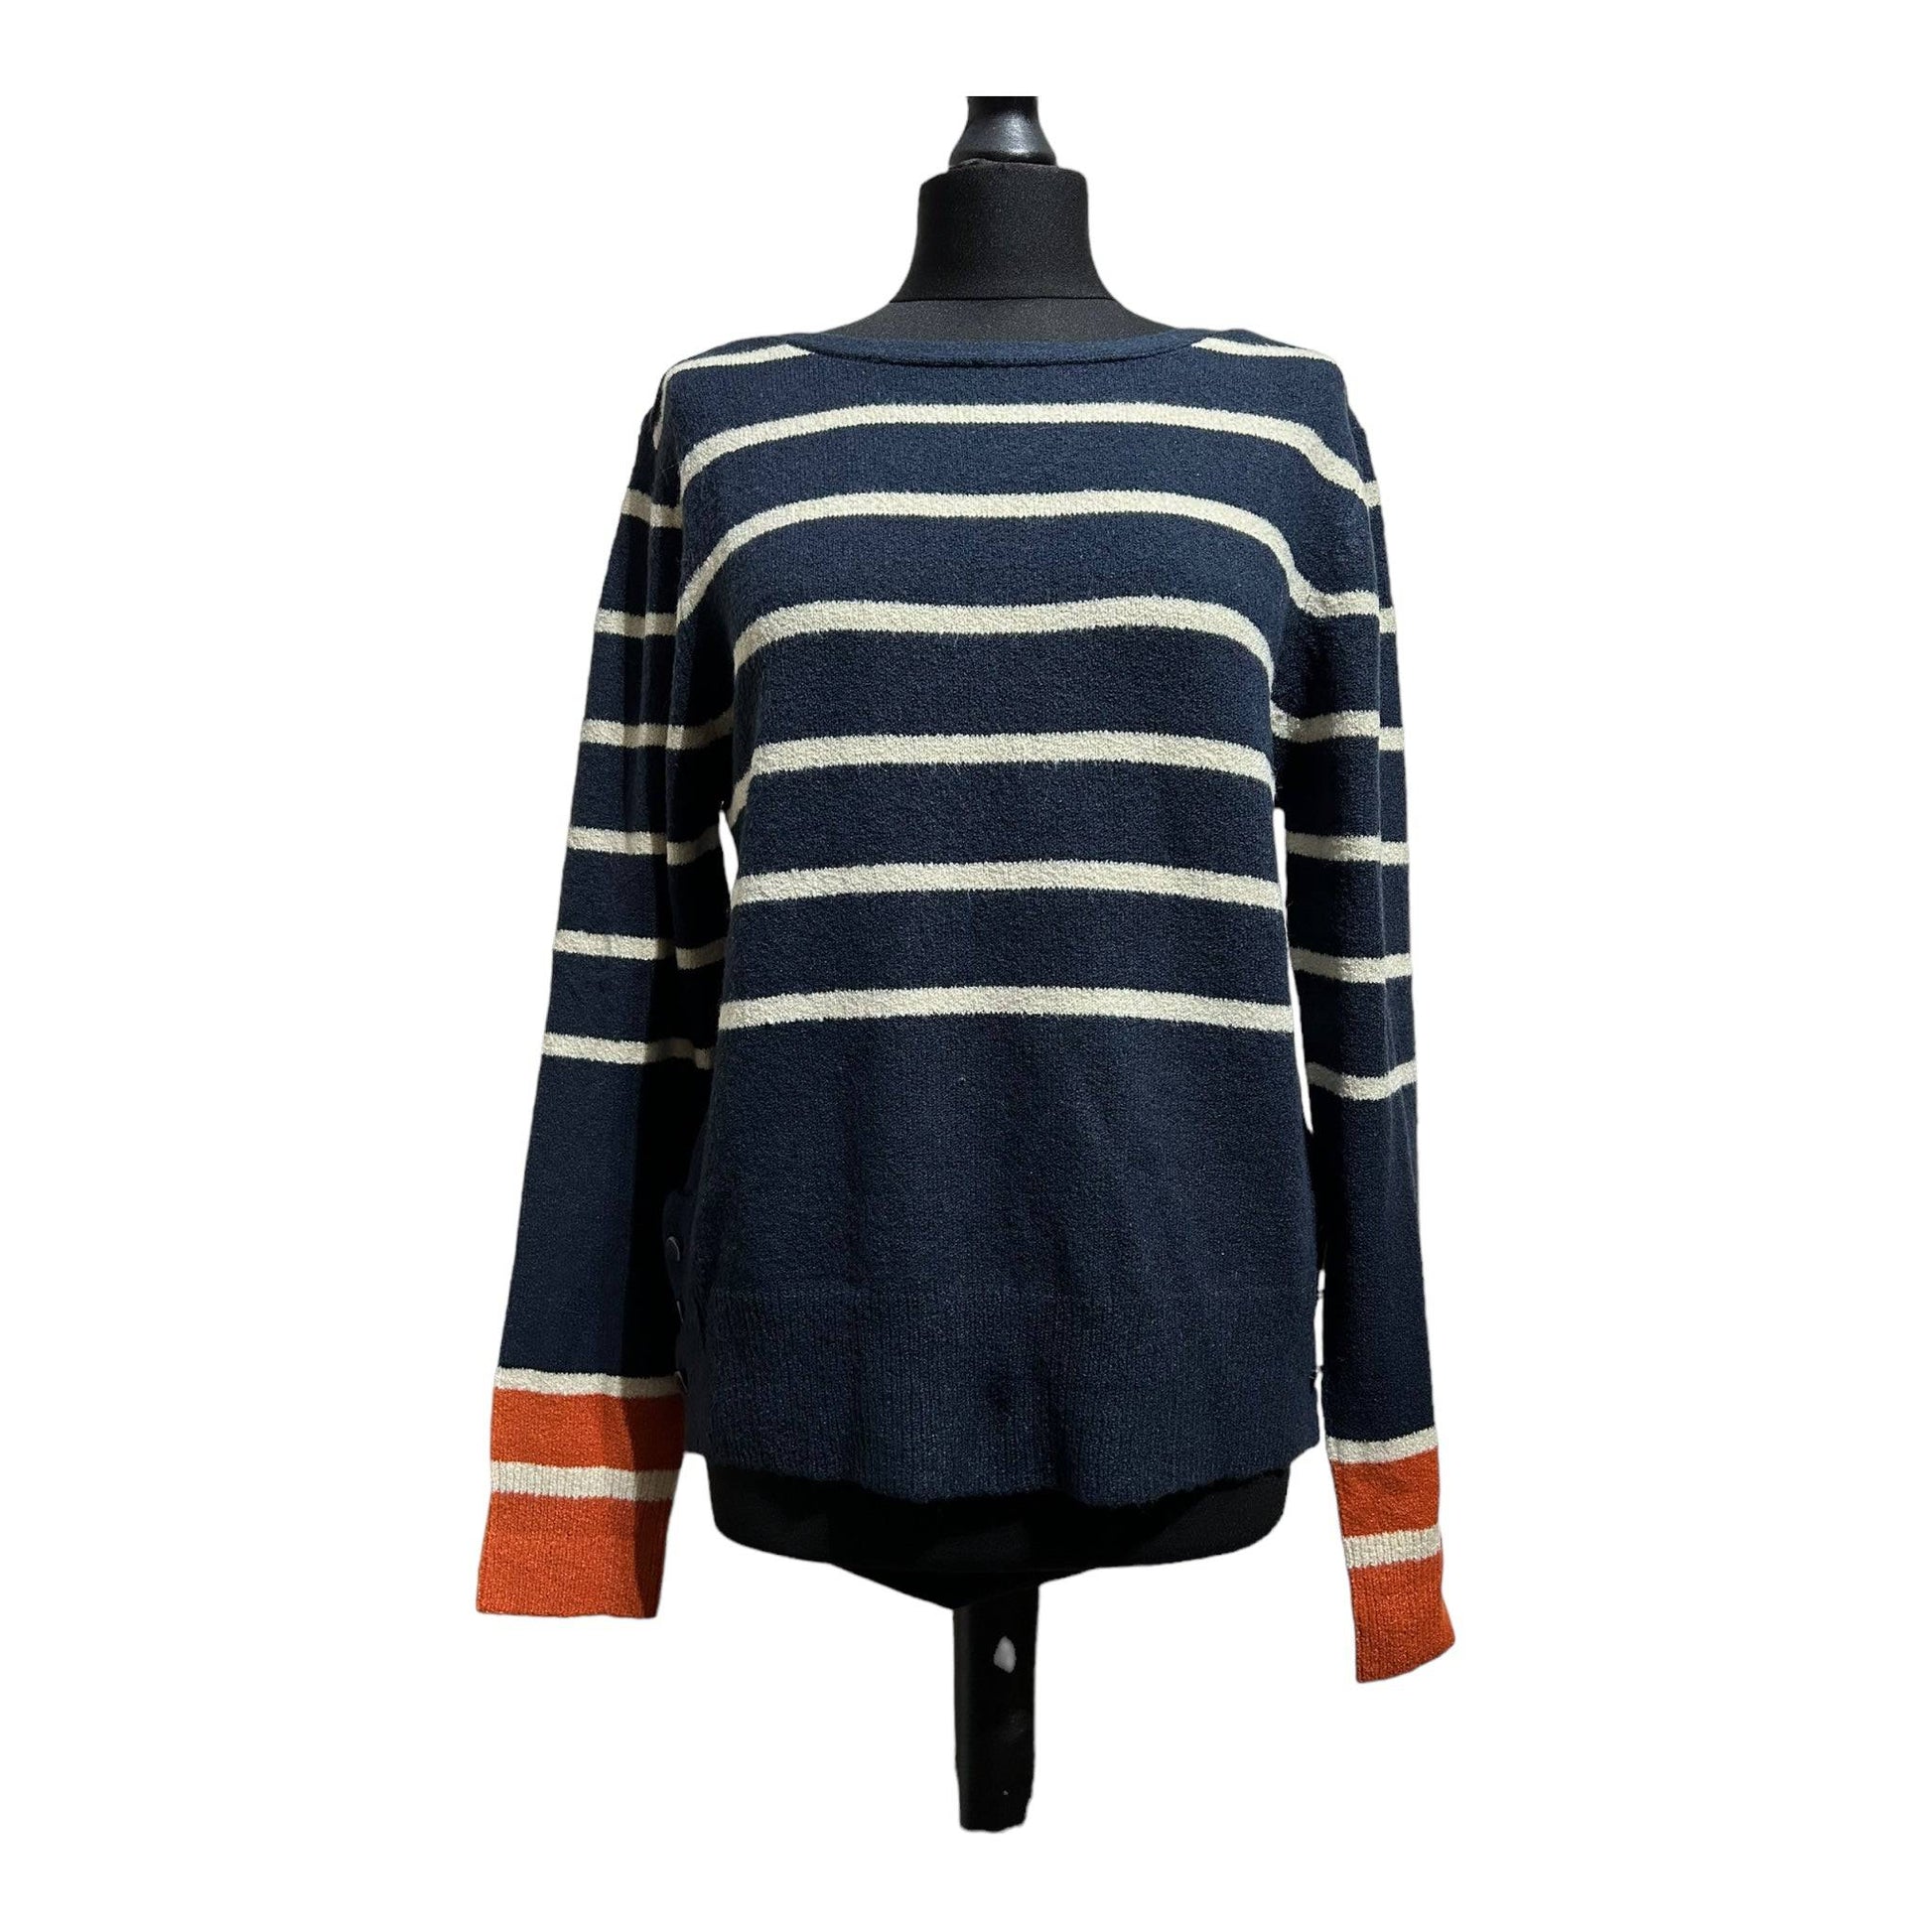 Oasis Striped Jumper - Recurring.Life